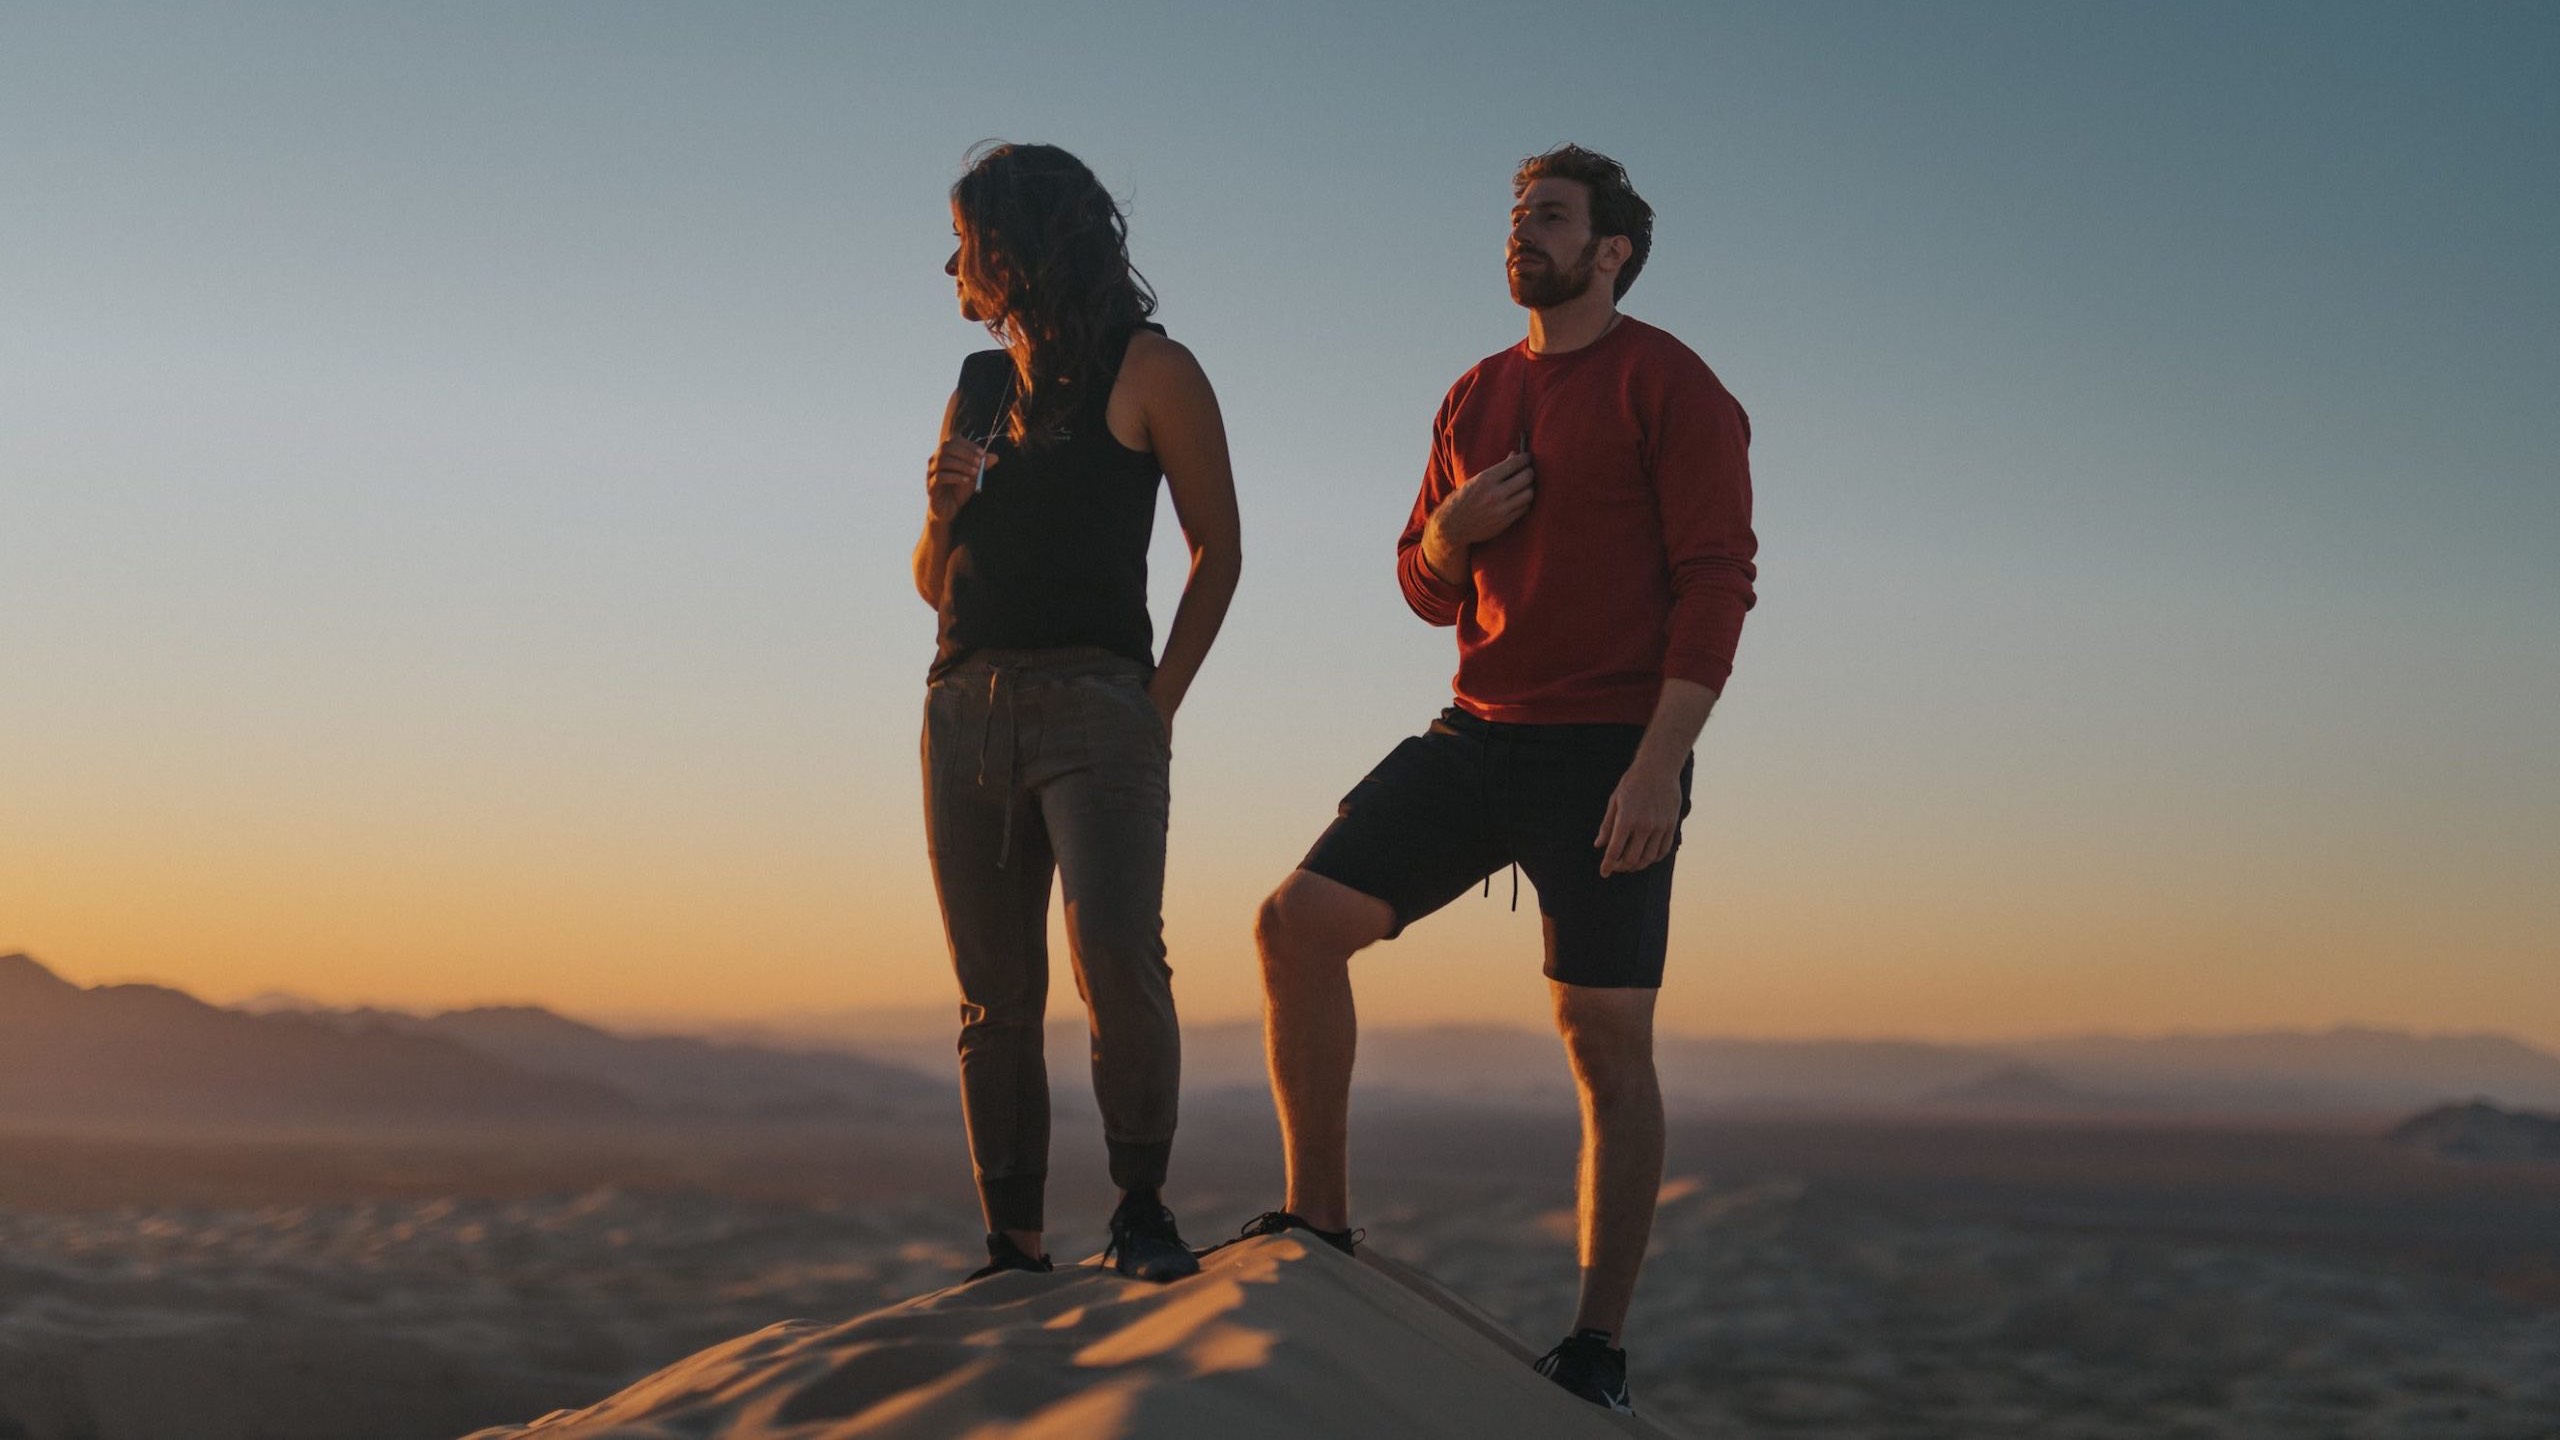 Komuso Video Production Los Angeles with man and woman standing on a sand mound at sunset with small hills in the background holding the whistle hanging around their necks